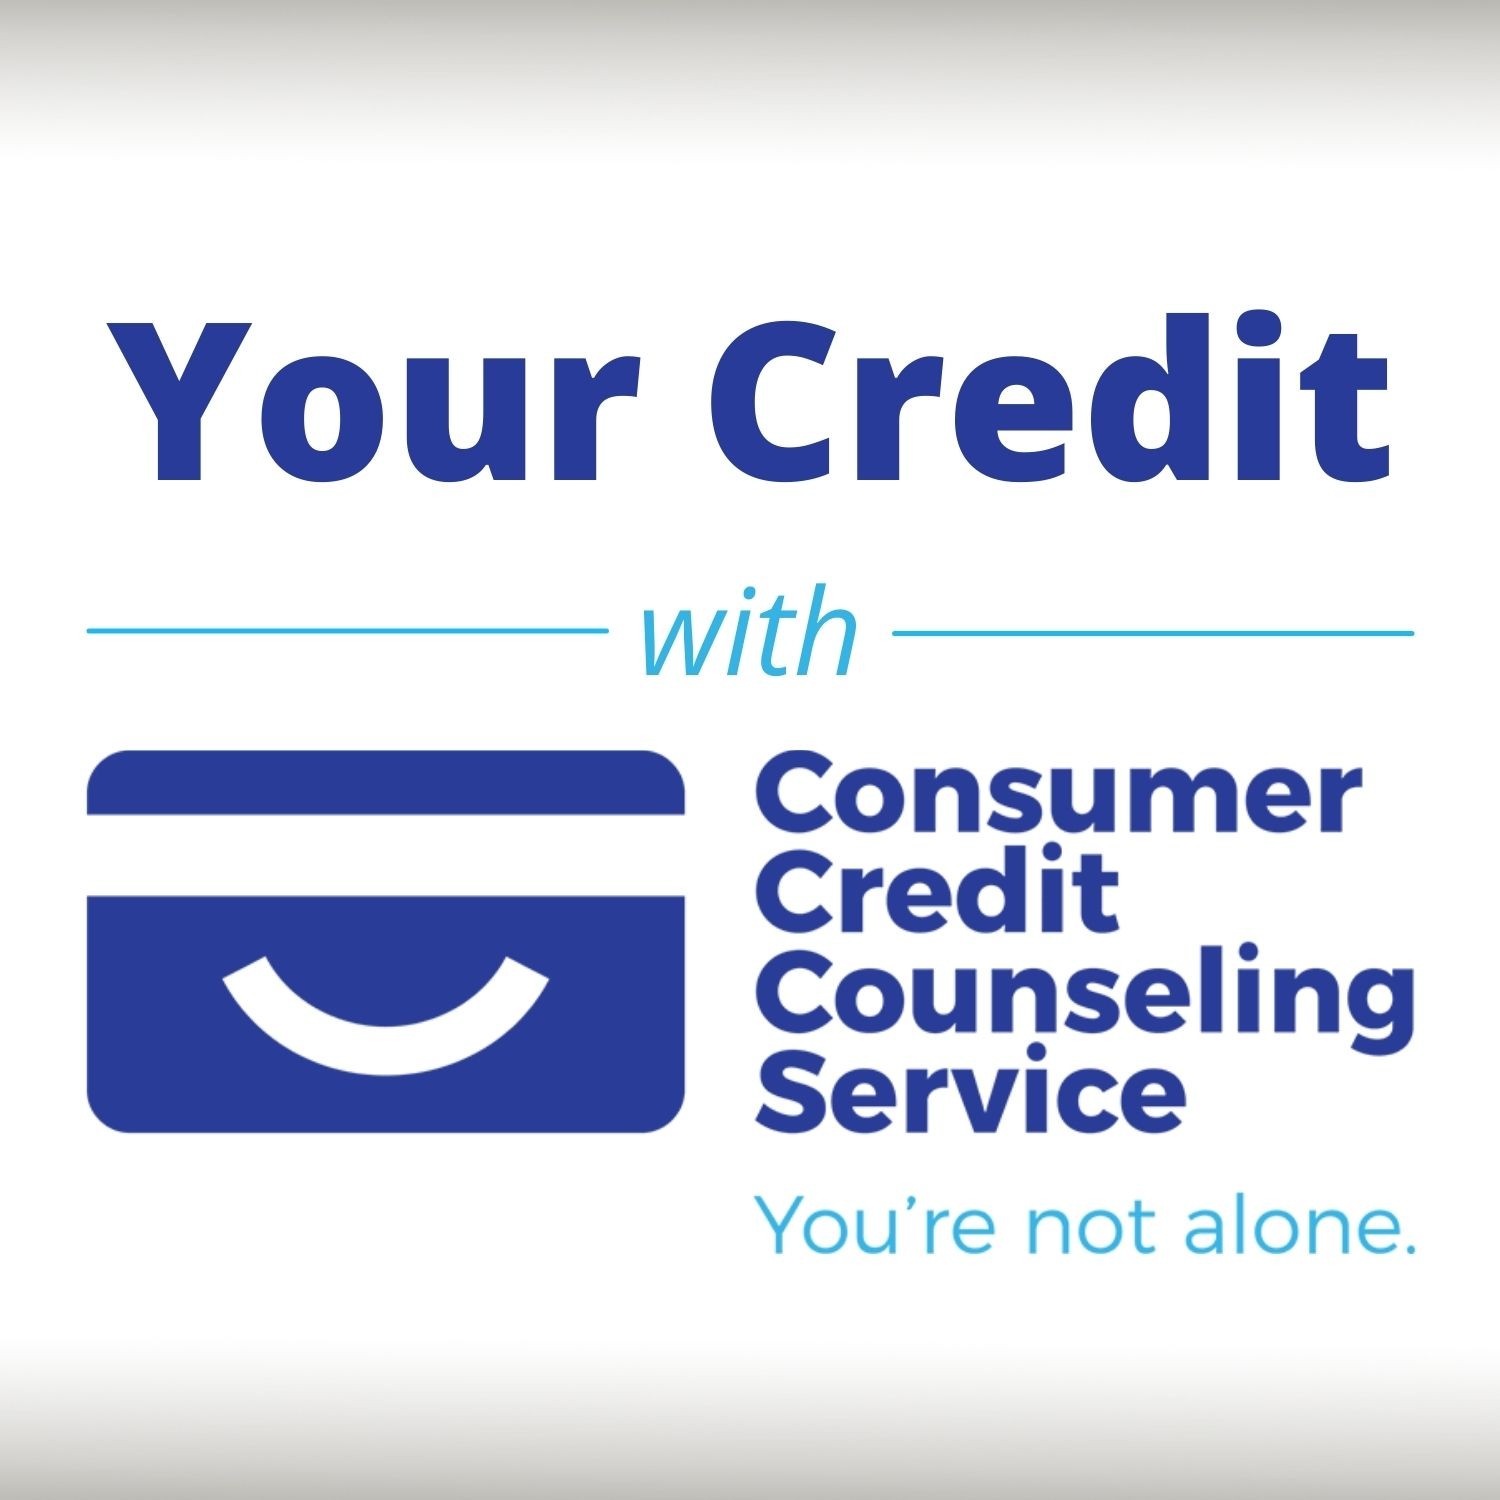 Your Credit